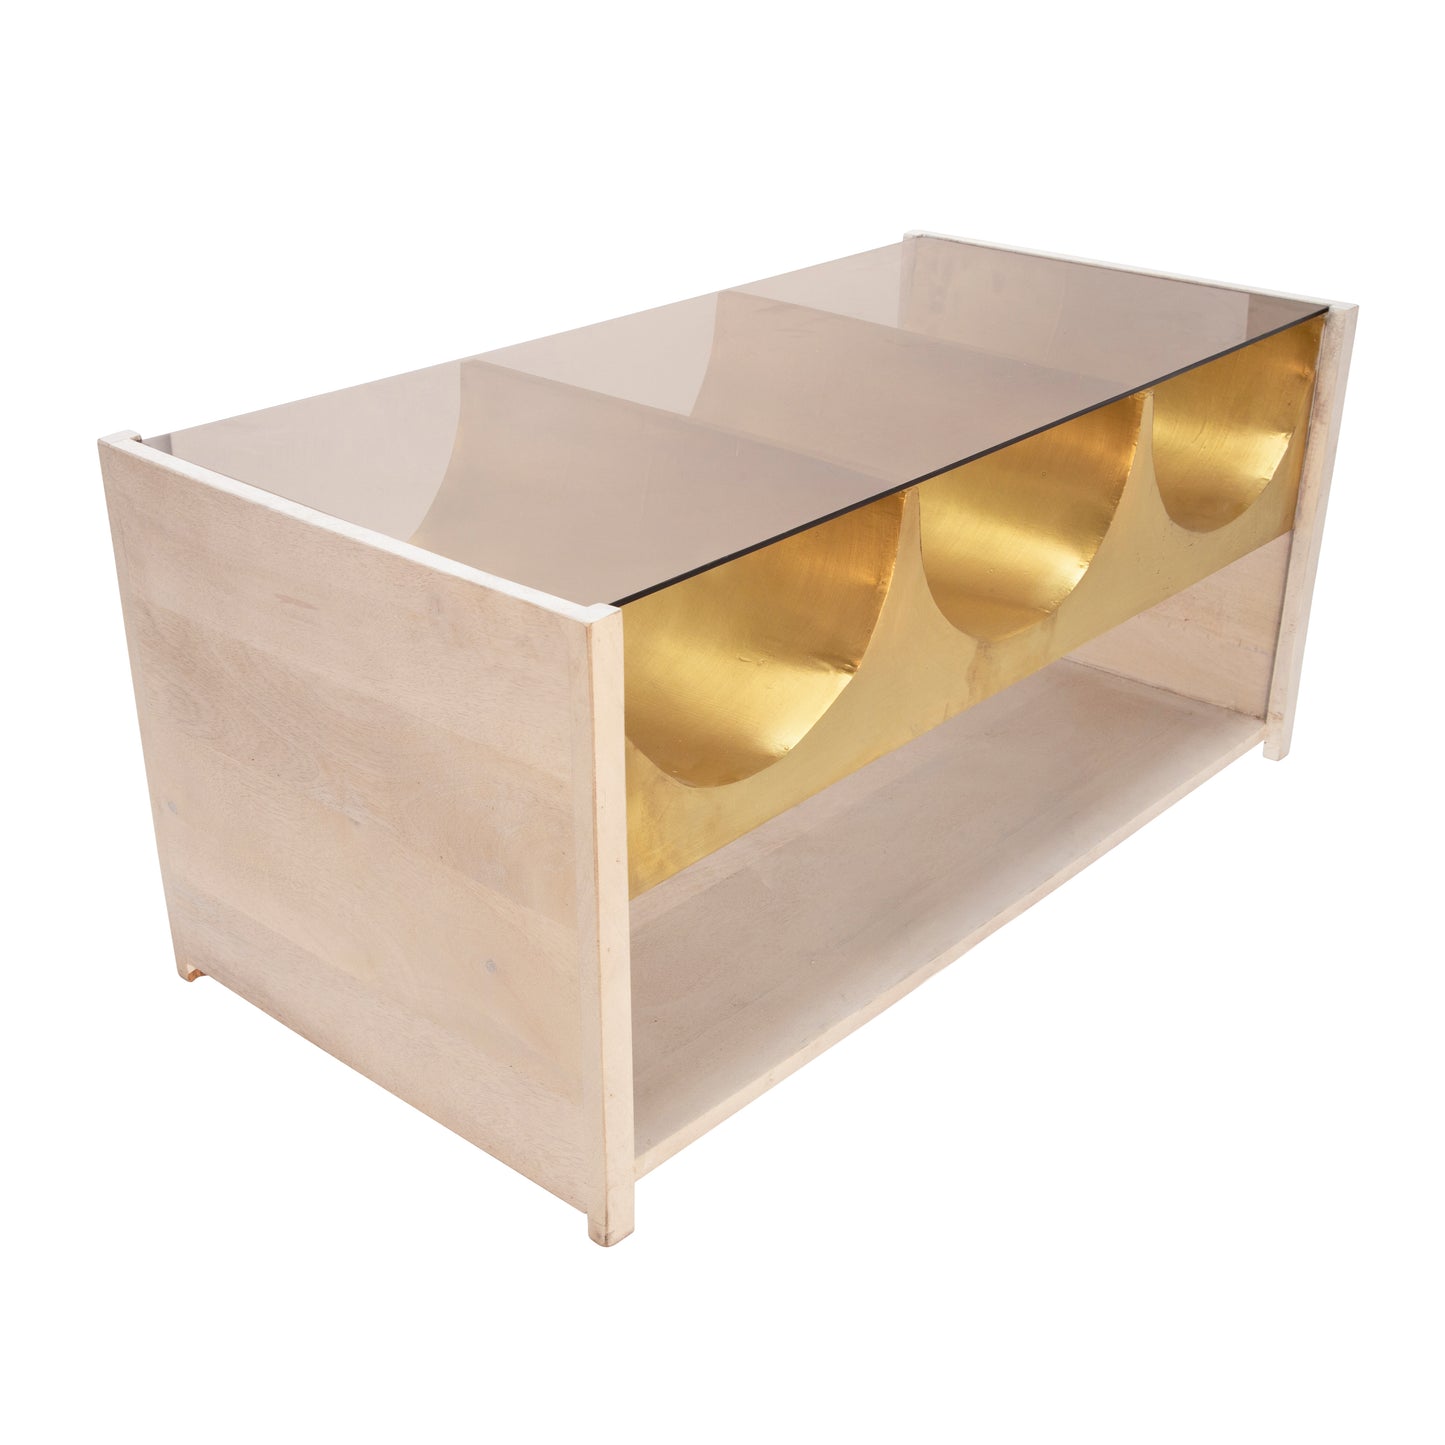 WOODEN 39" COCKTAIL TABLE, GOLD / WHITE WASH